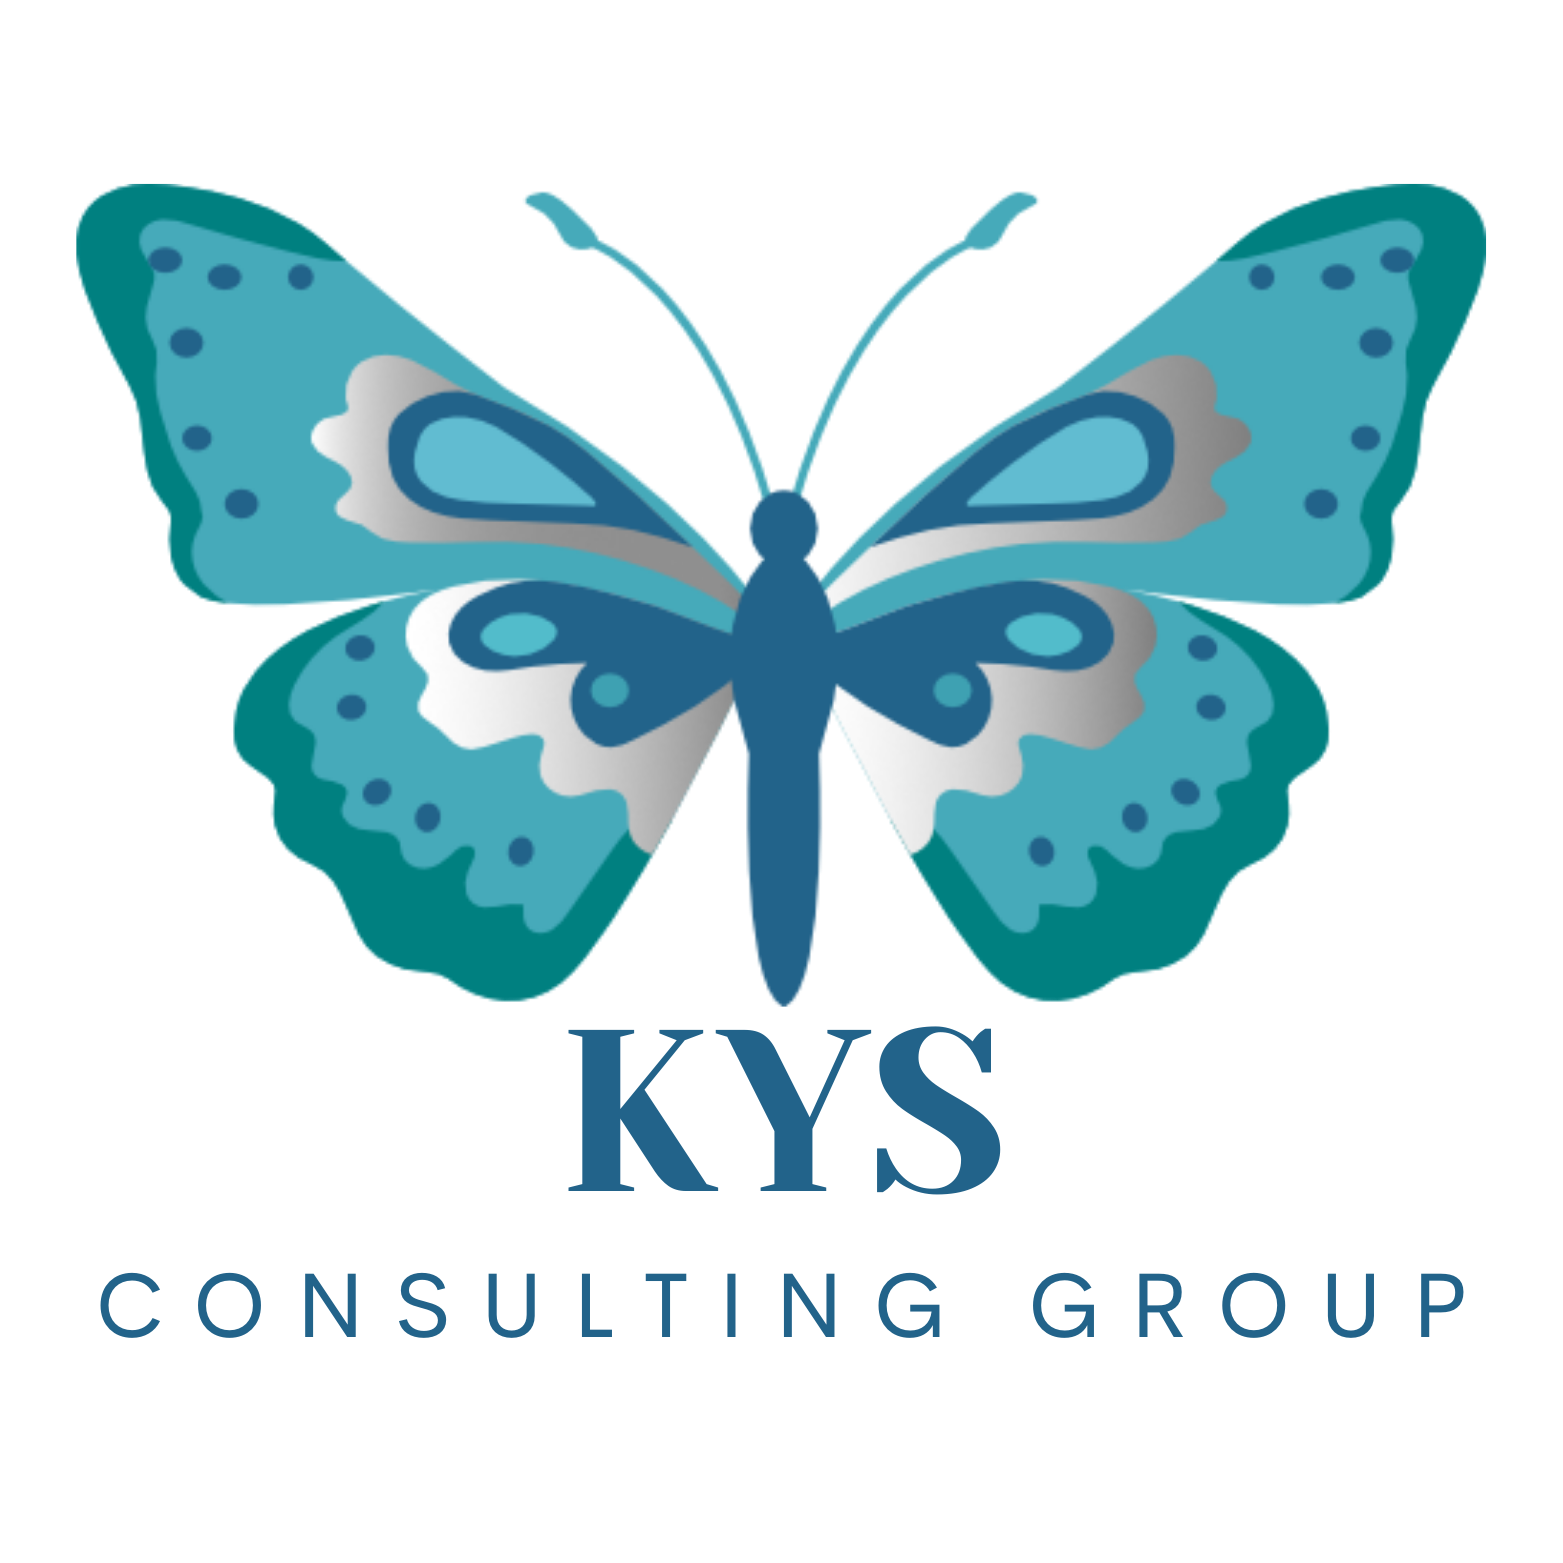 KYS CONSULTING GROUP